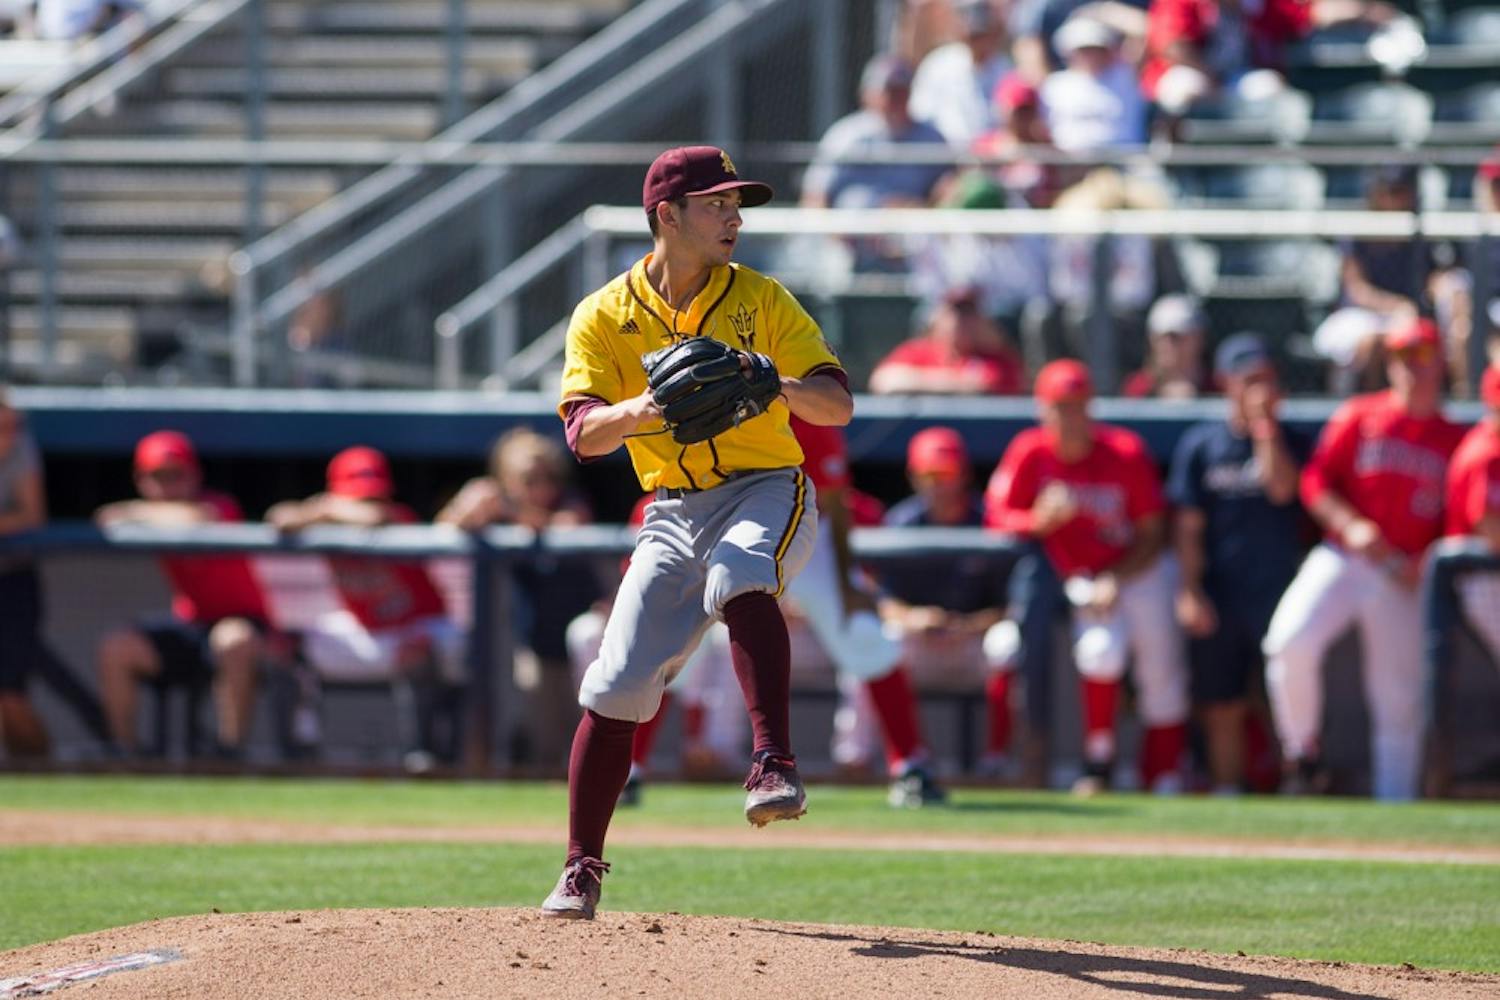 Senior pitcher Jordan Aboites winds up during a game against UA on Sunday, May 15, 2016, at Hi Corbett Field in Tucson. The Sun Devils defeated the Wildcats 5-1.